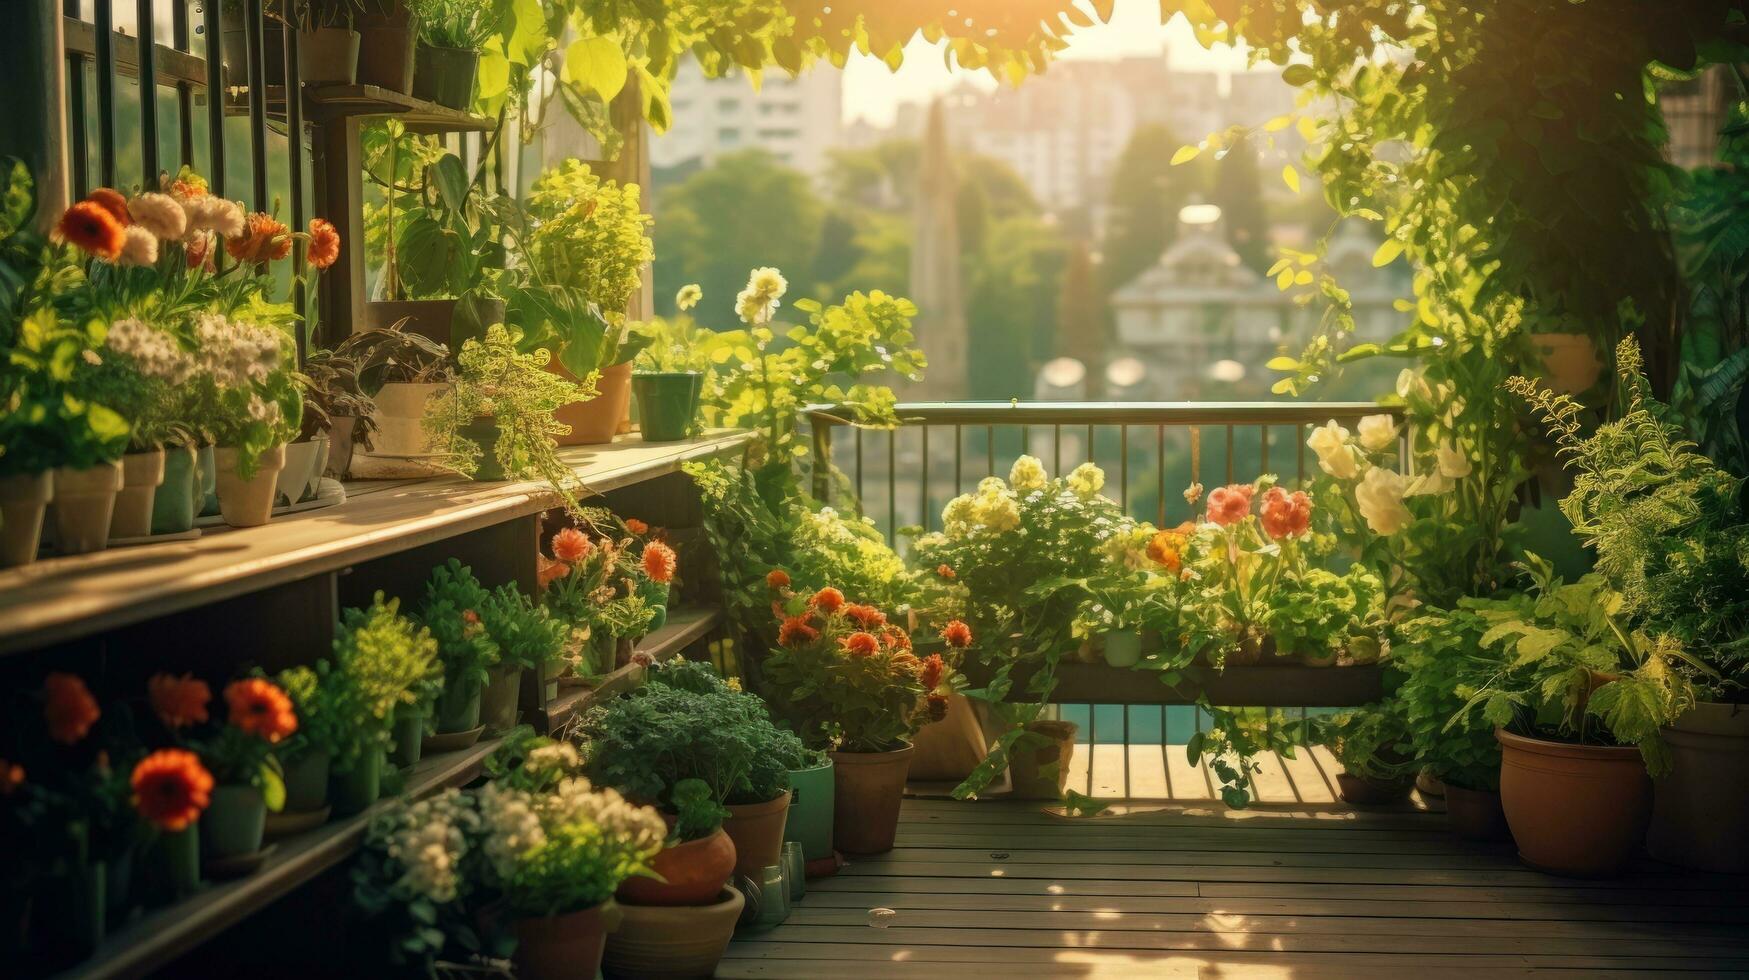 Terrace with potted plants and flowers photo